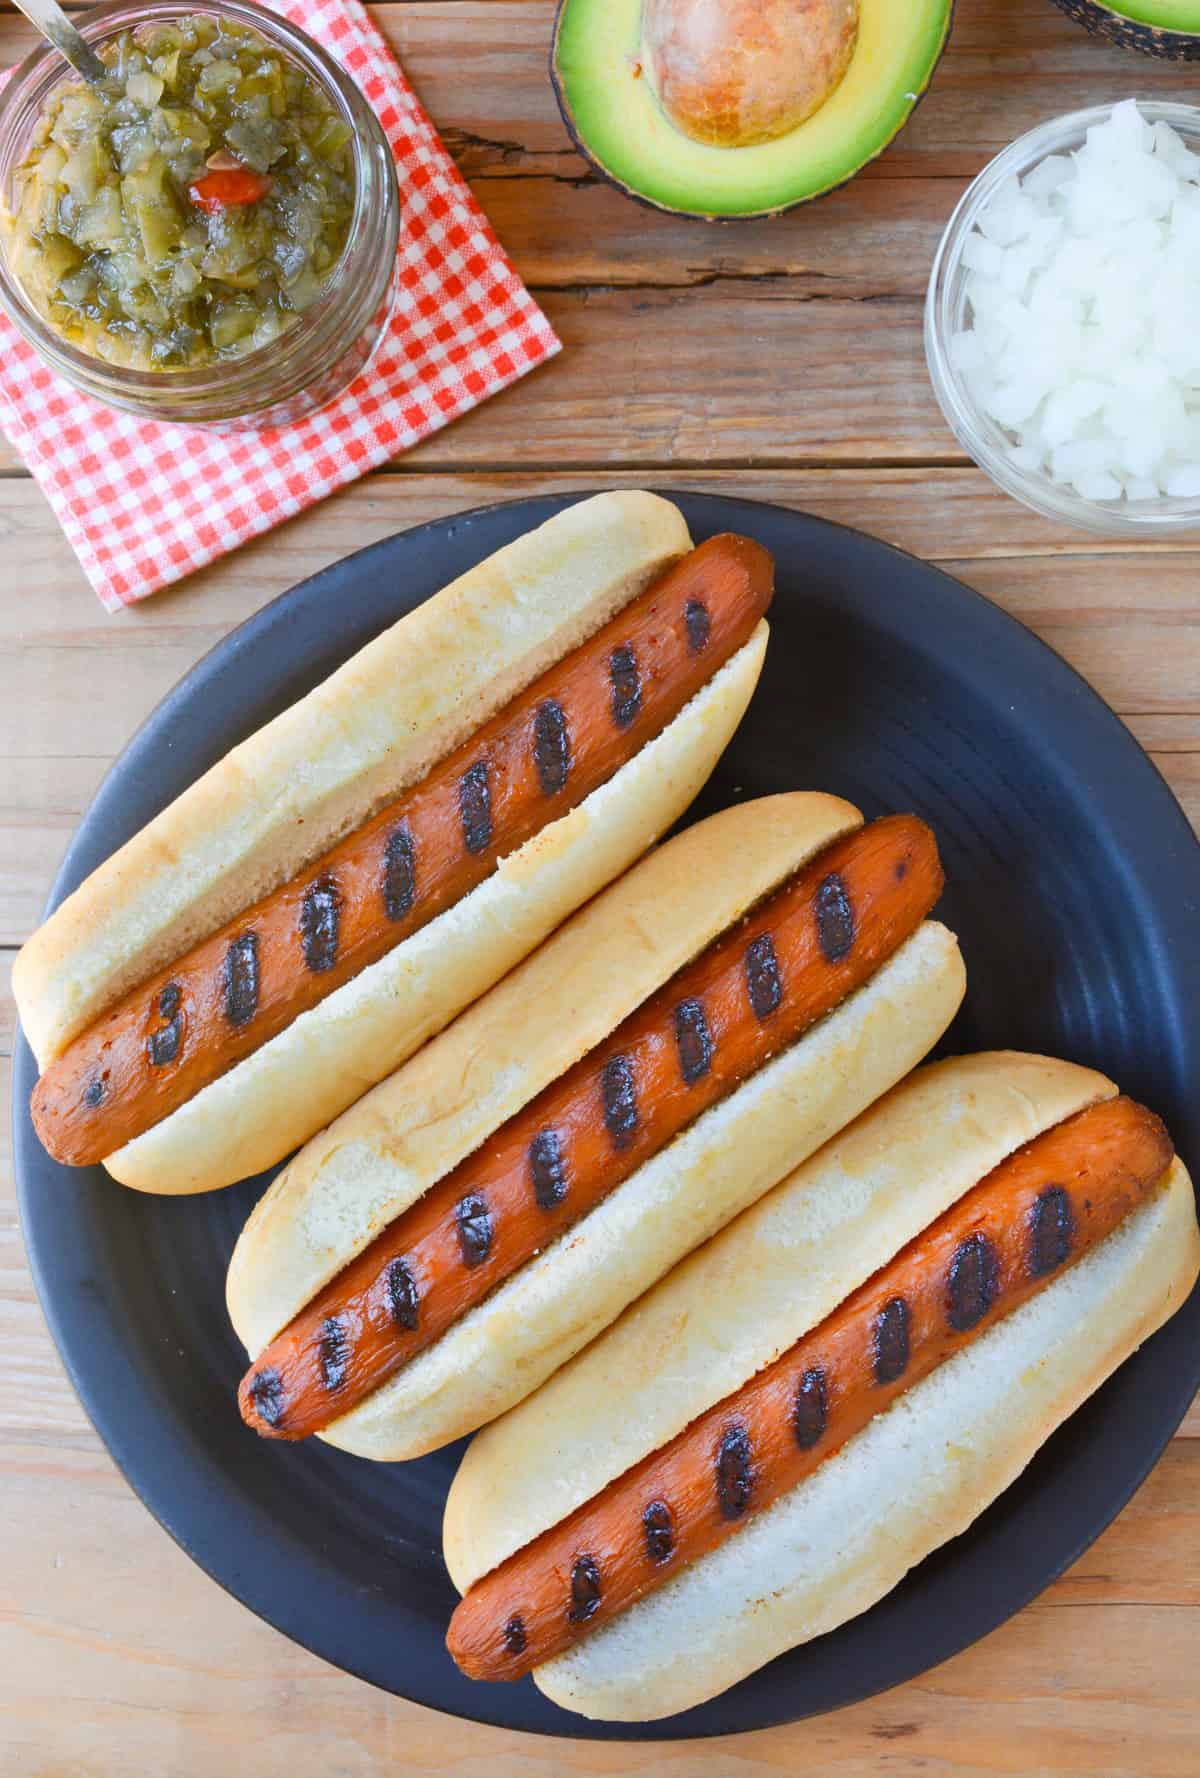 Three grilled carrot hot dogs in buns.